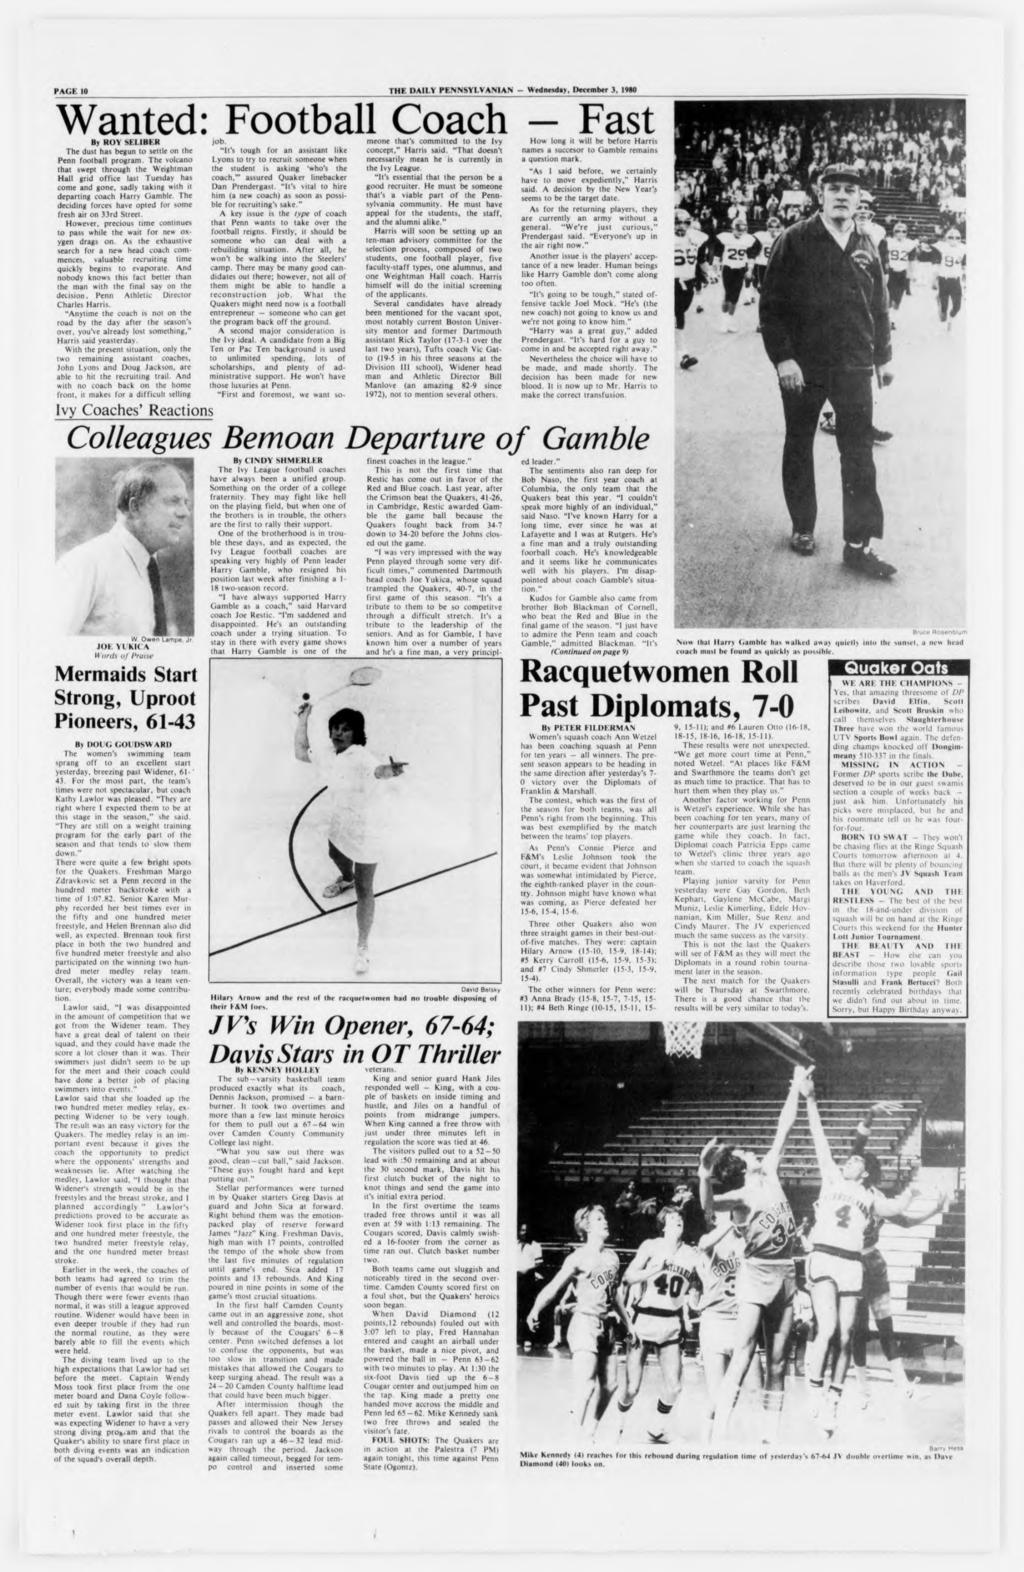 PAGE 10 THE DAILY PENNSYLVANIA!* - Wednesday December 3, 1980 Wanted: Football Coach Fast job.